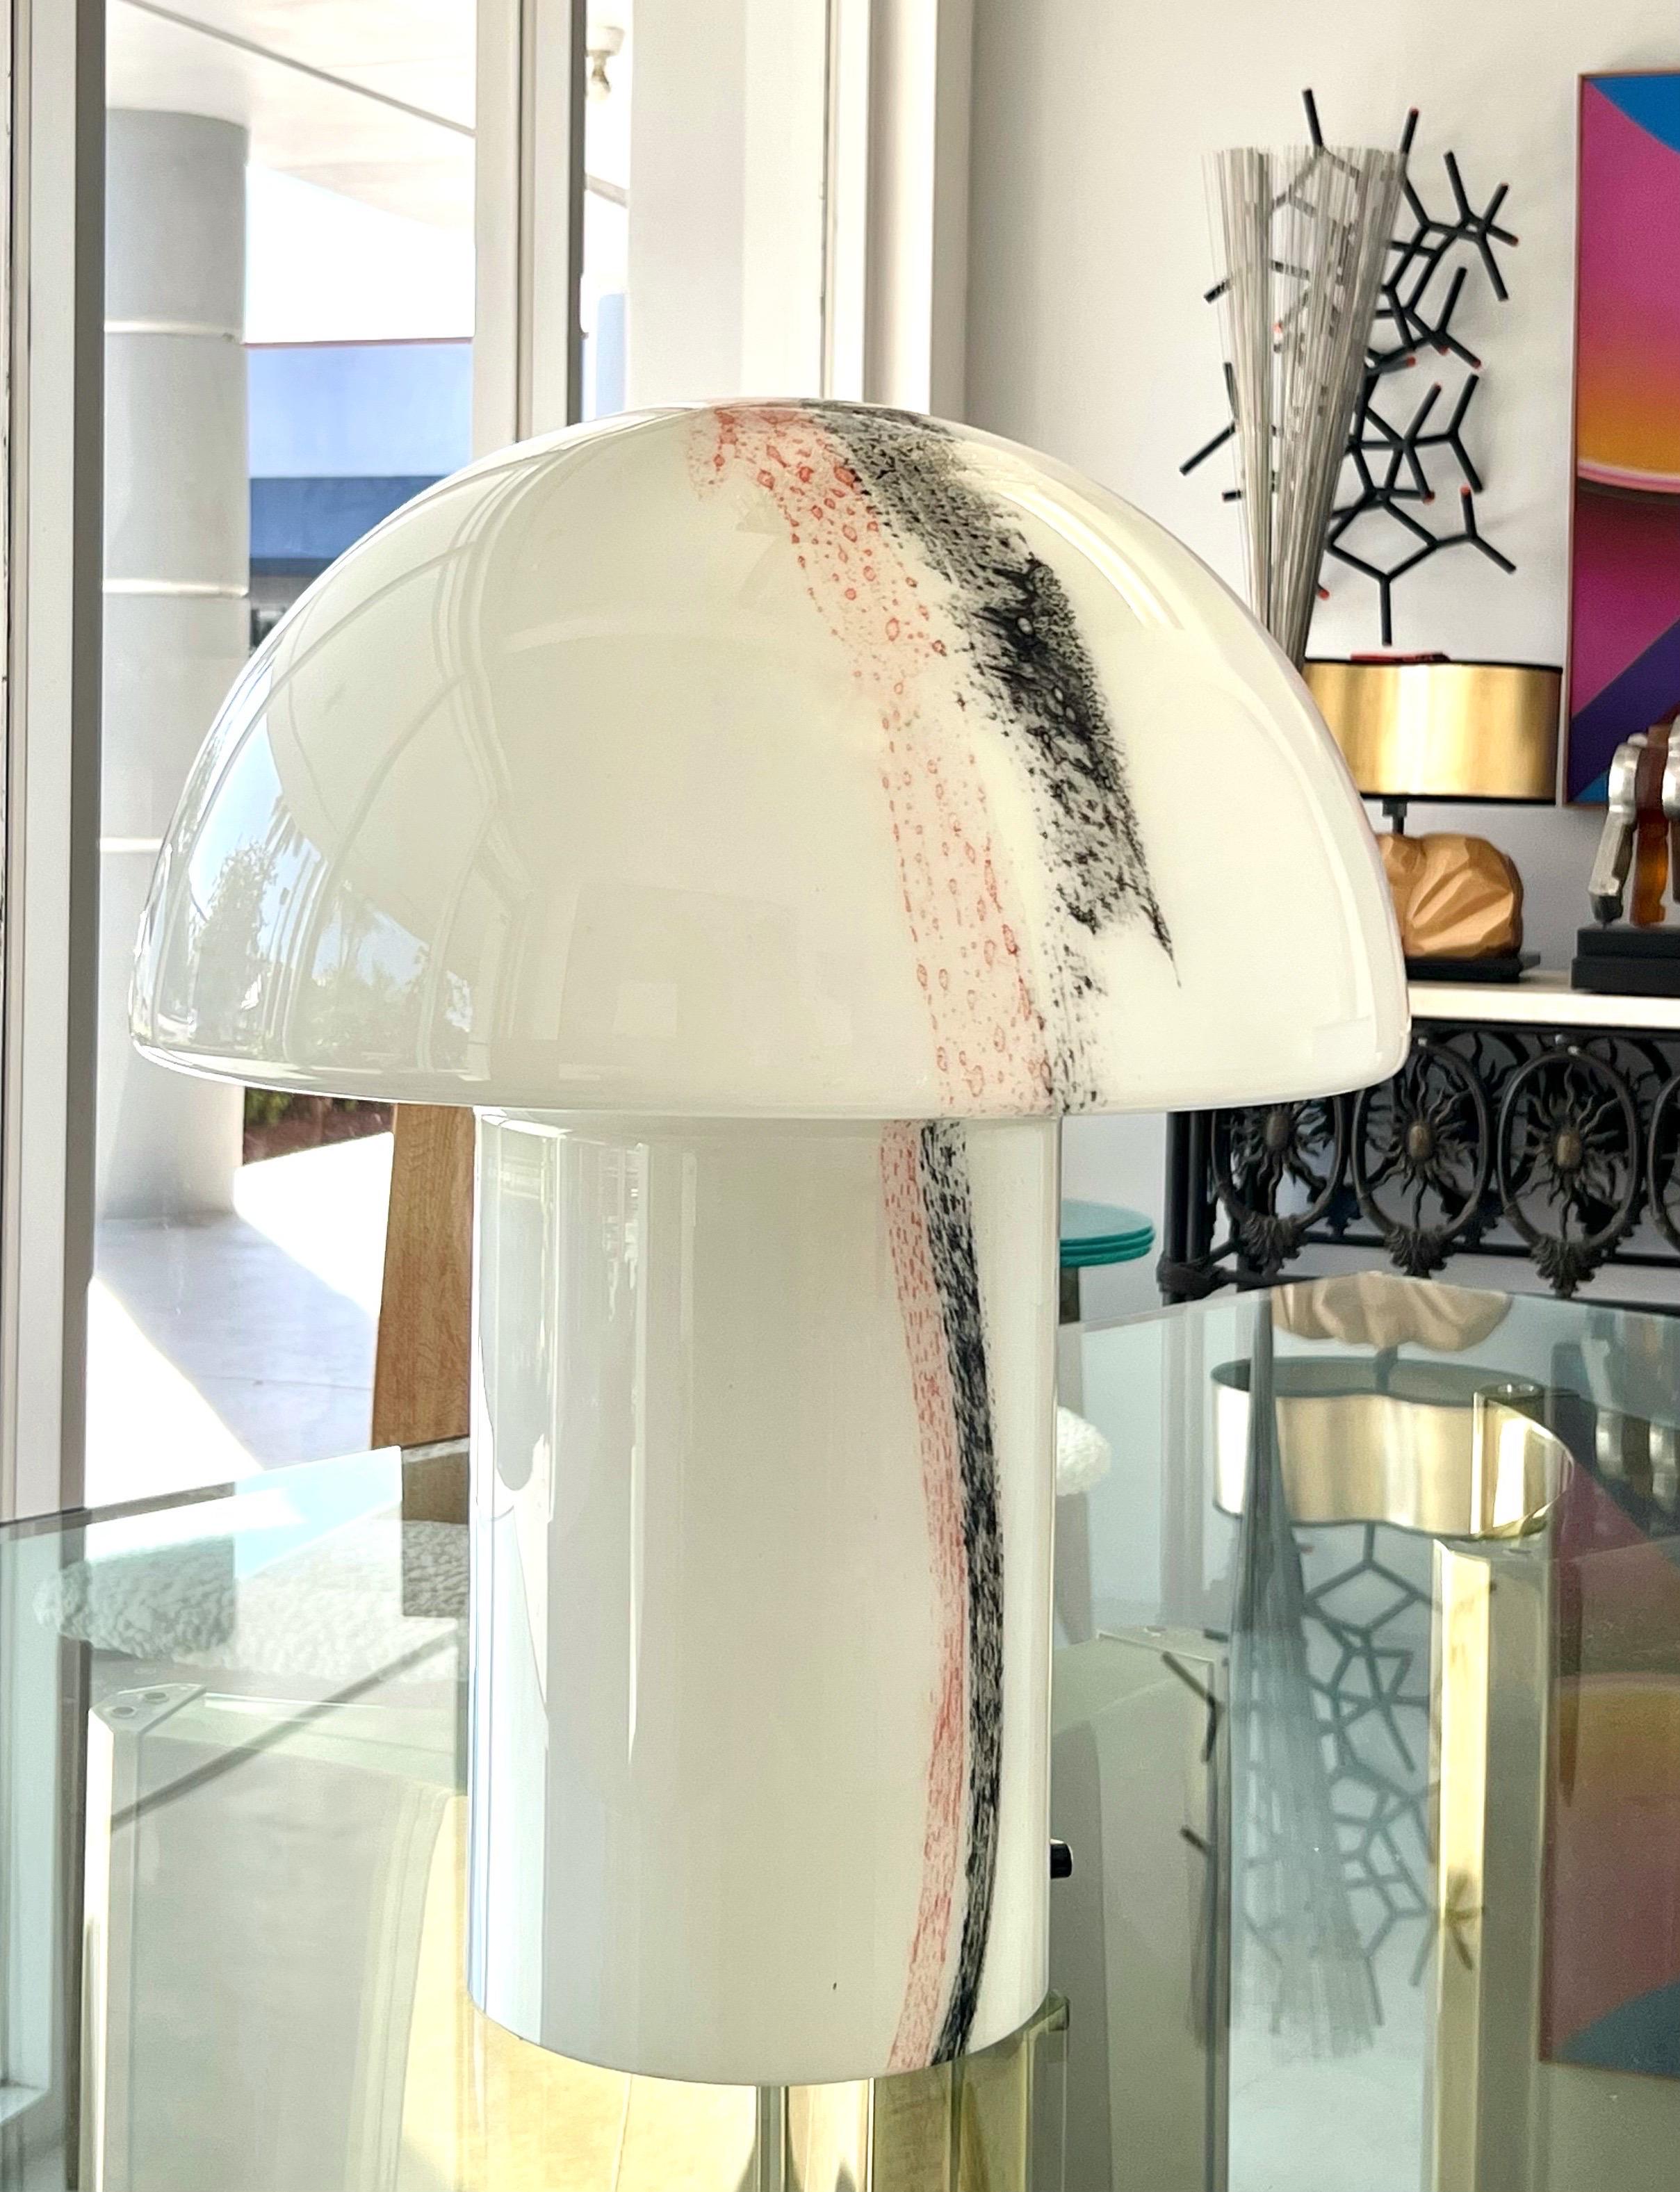 Large and striking lamp. Iconic mushroom form in white with a trace of color. 